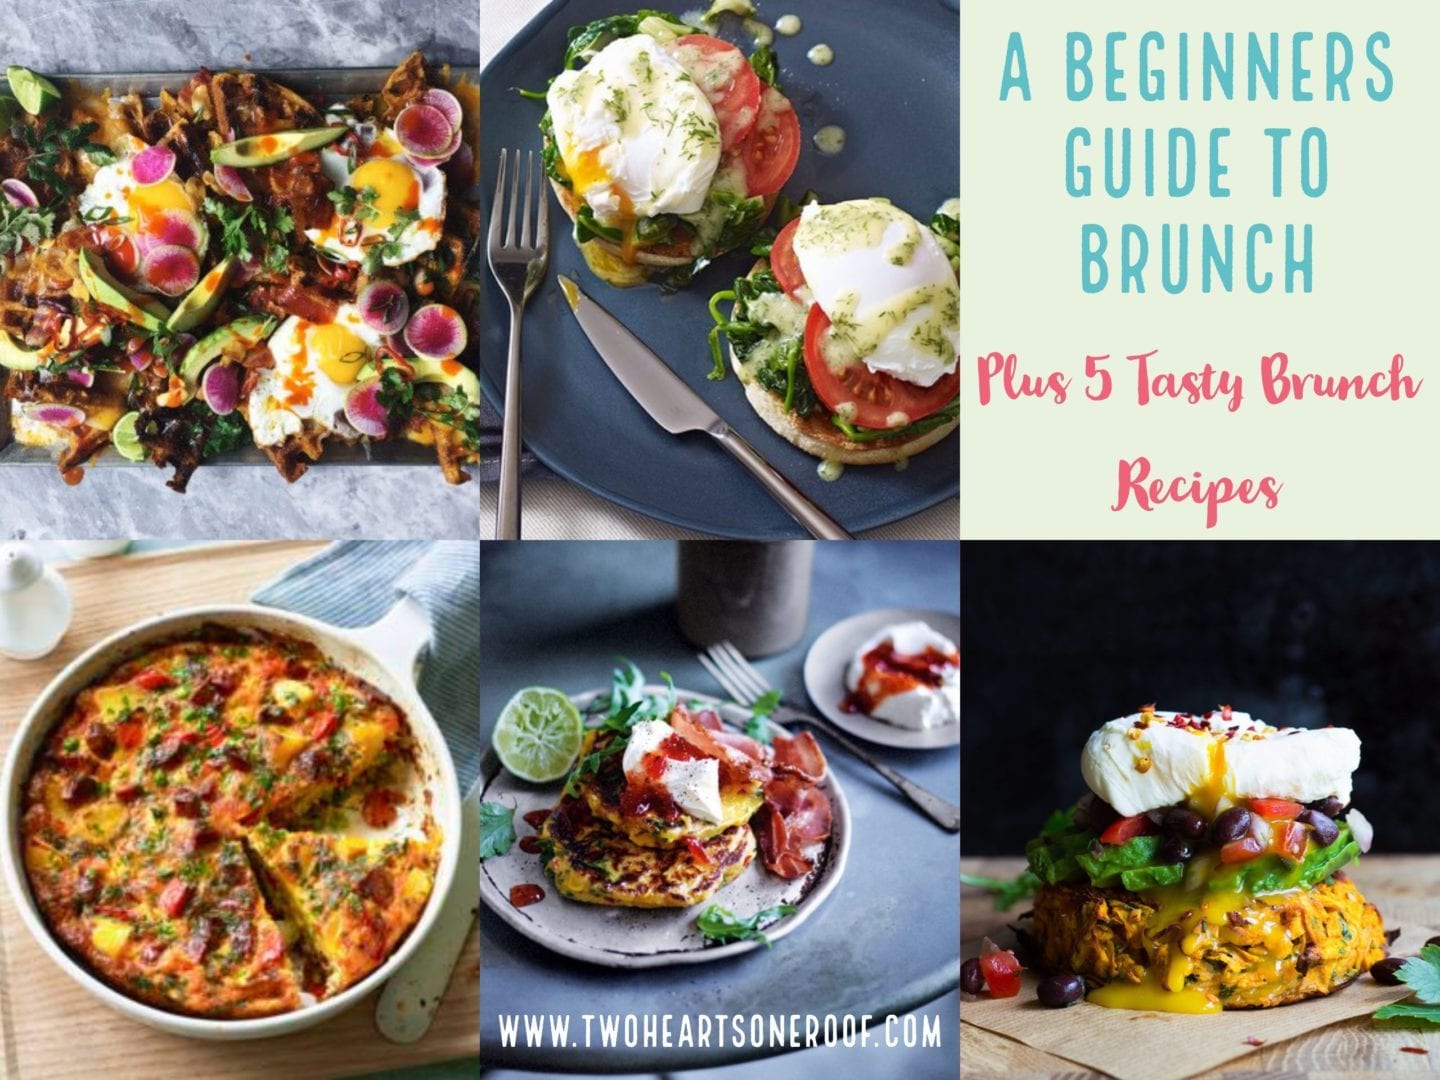 The Beginners Guide to Brunch – Plus 5 Tasty Brunch Recipes